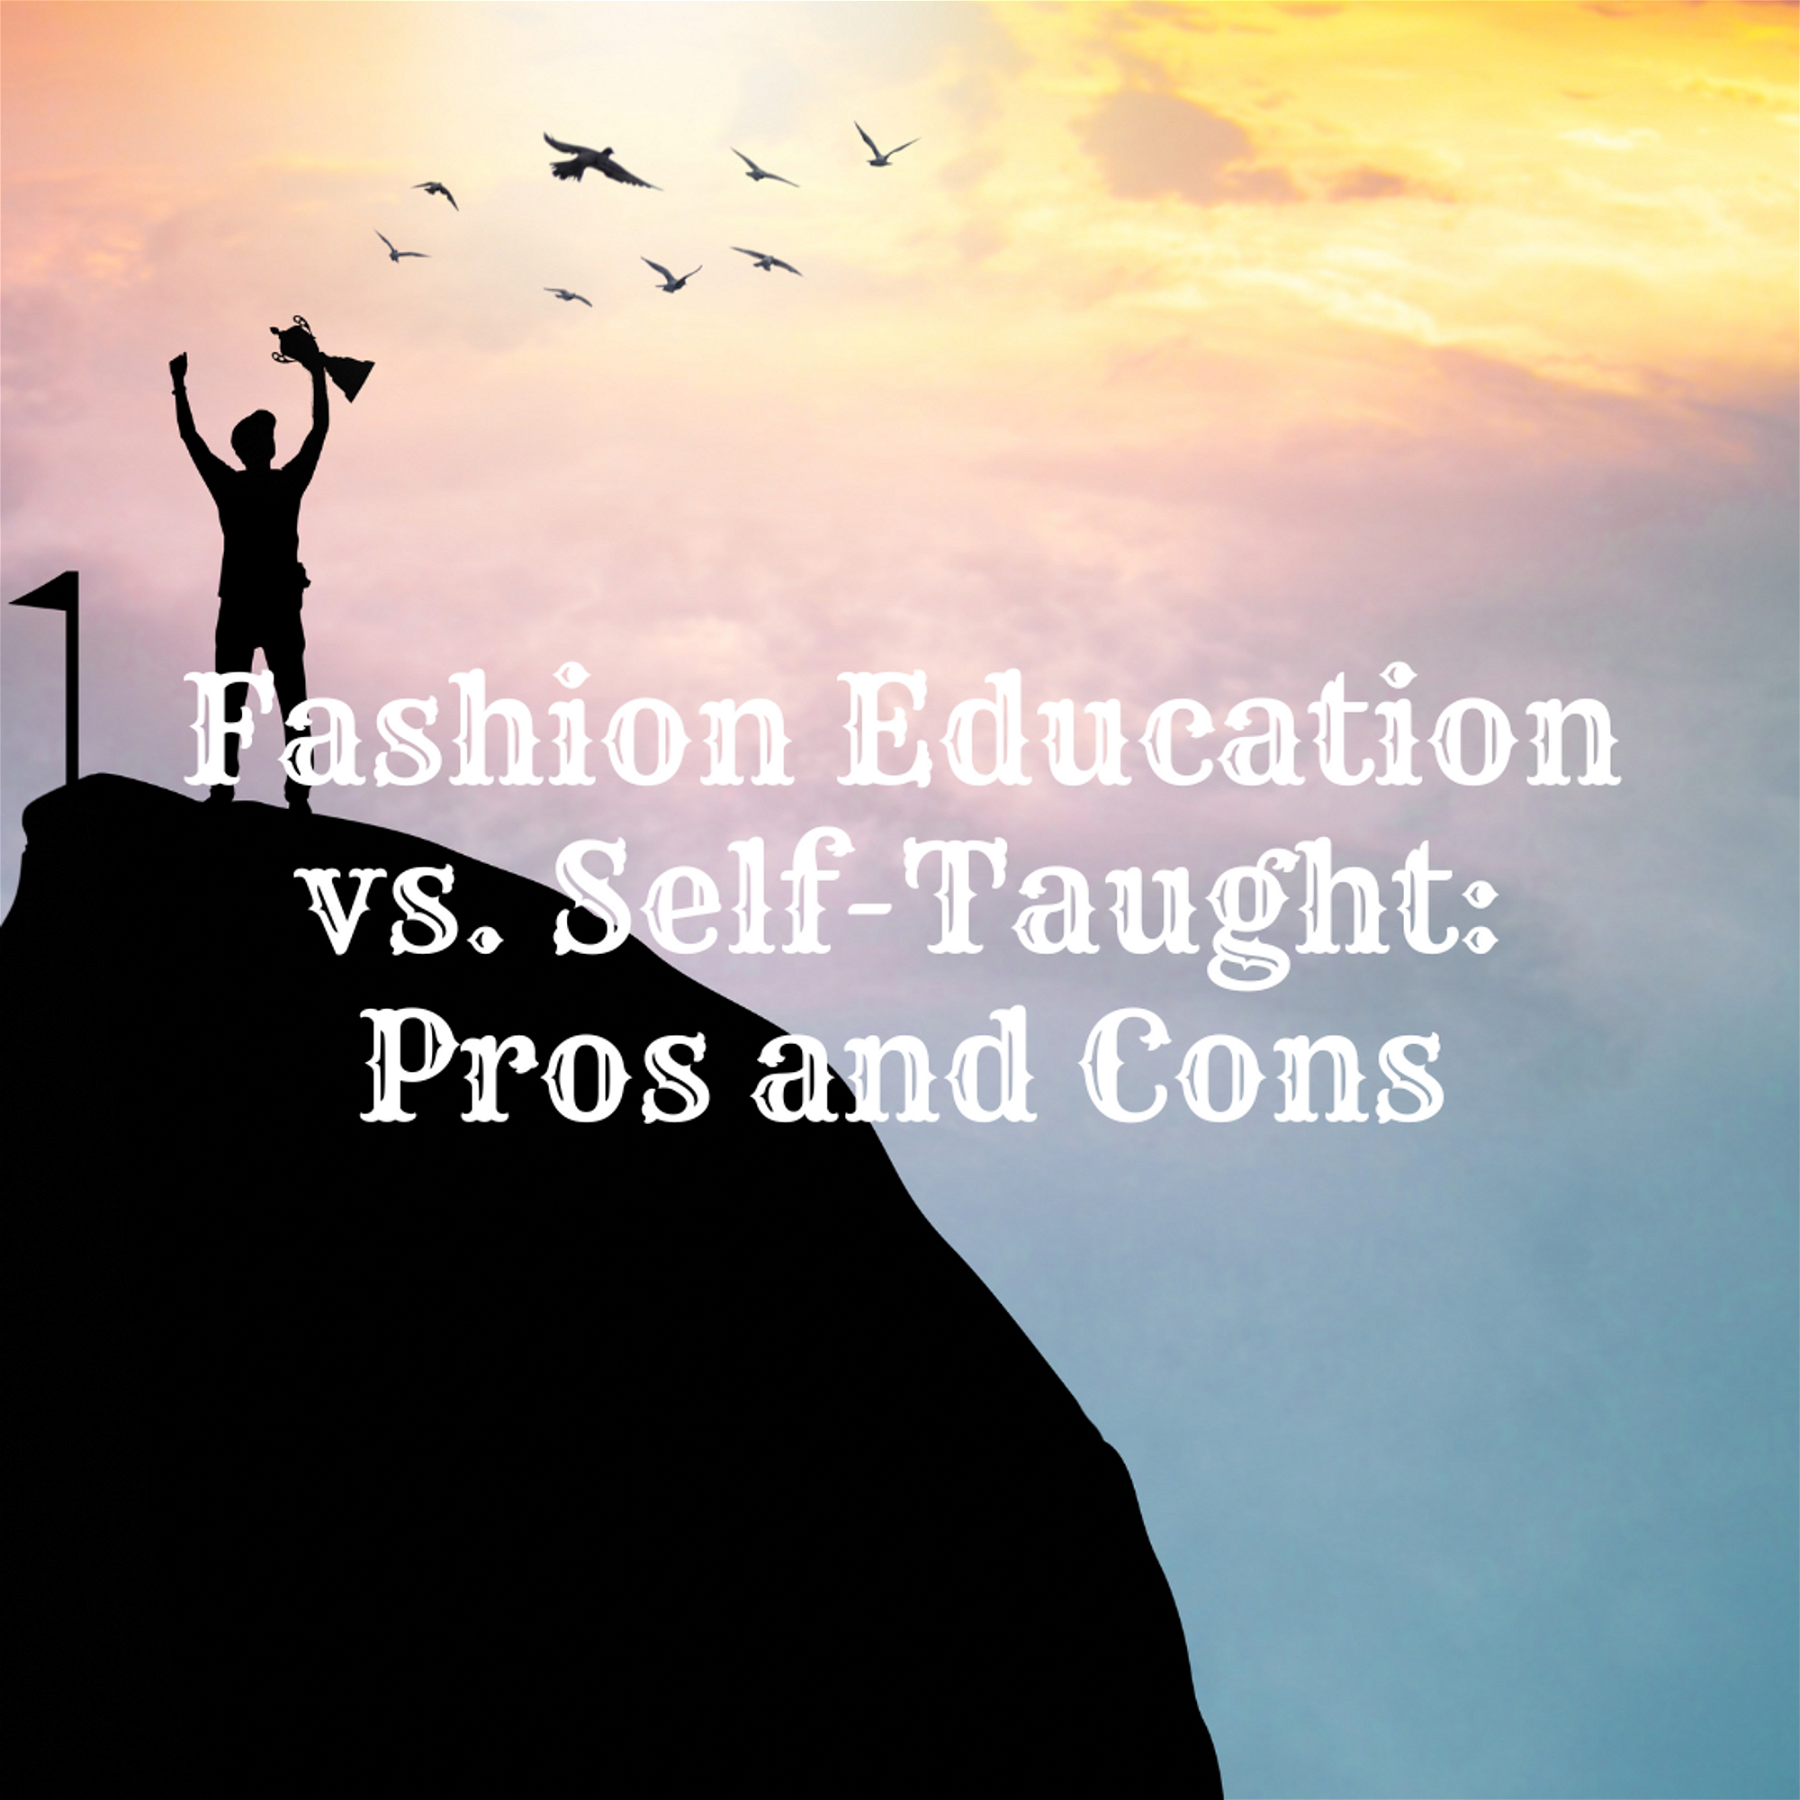 Fashion Education vs. Self-Taught: Pros and Cons